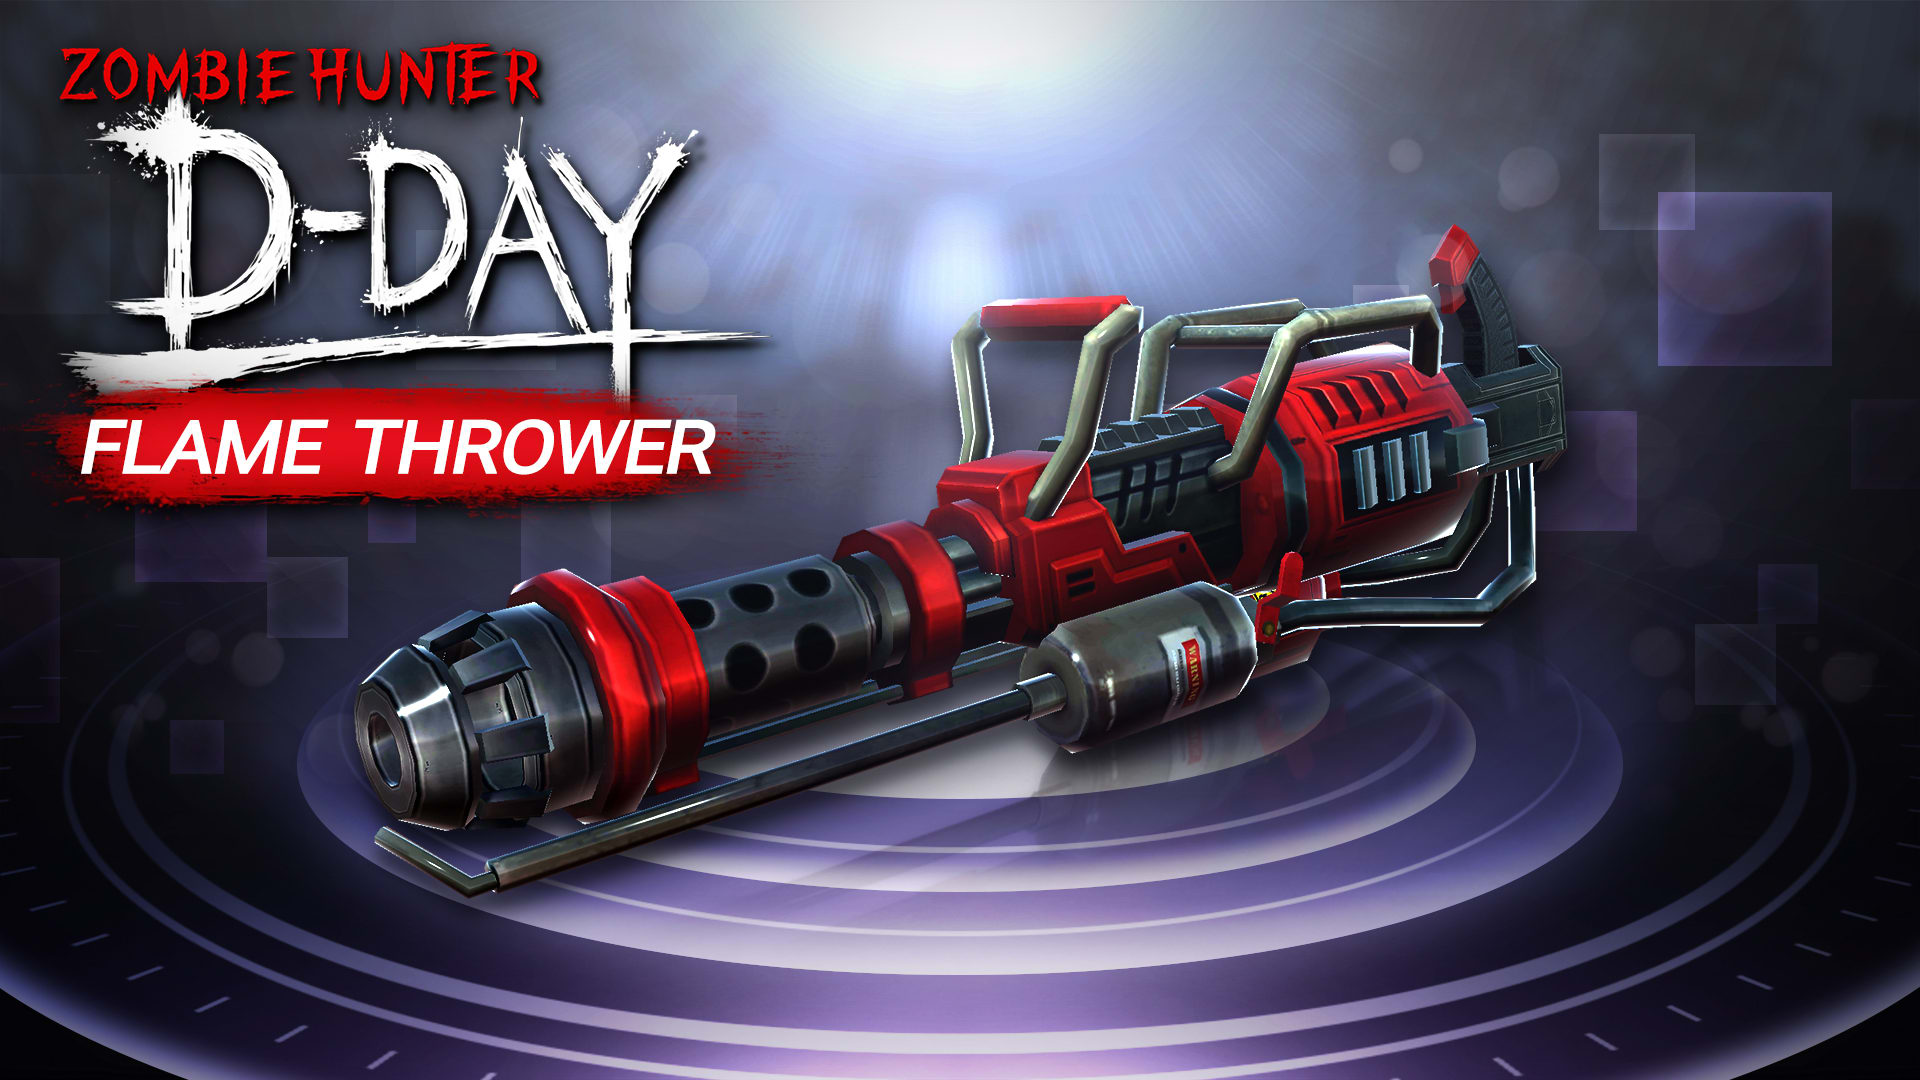 SS-ranked Weapon "FLAMETHROWER"